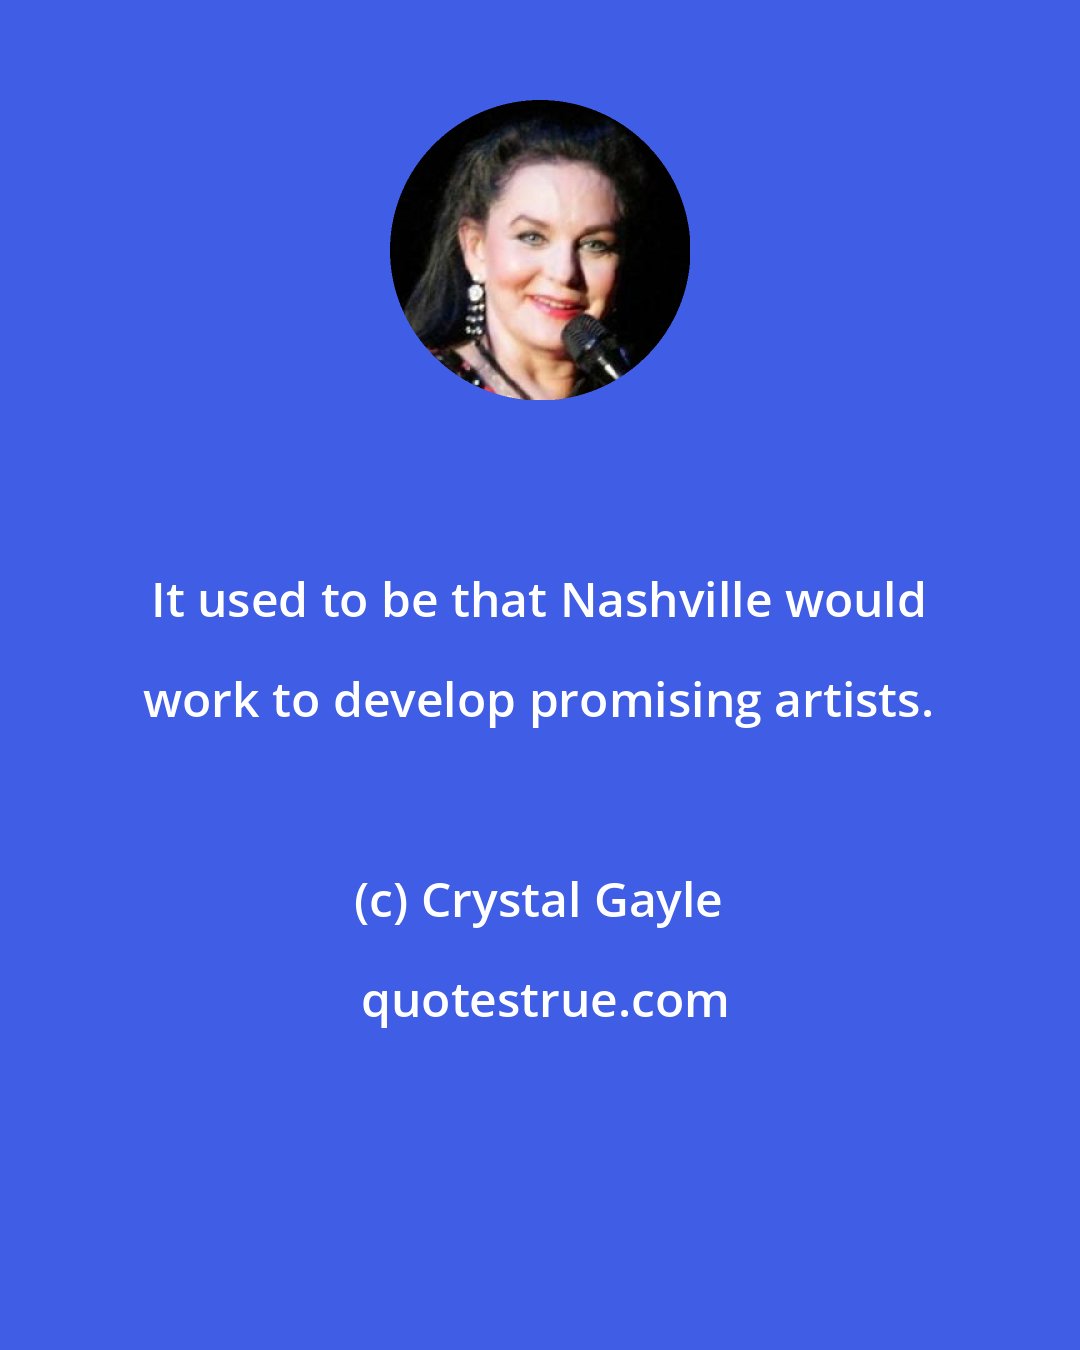 Crystal Gayle: It used to be that Nashville would work to develop promising artists.